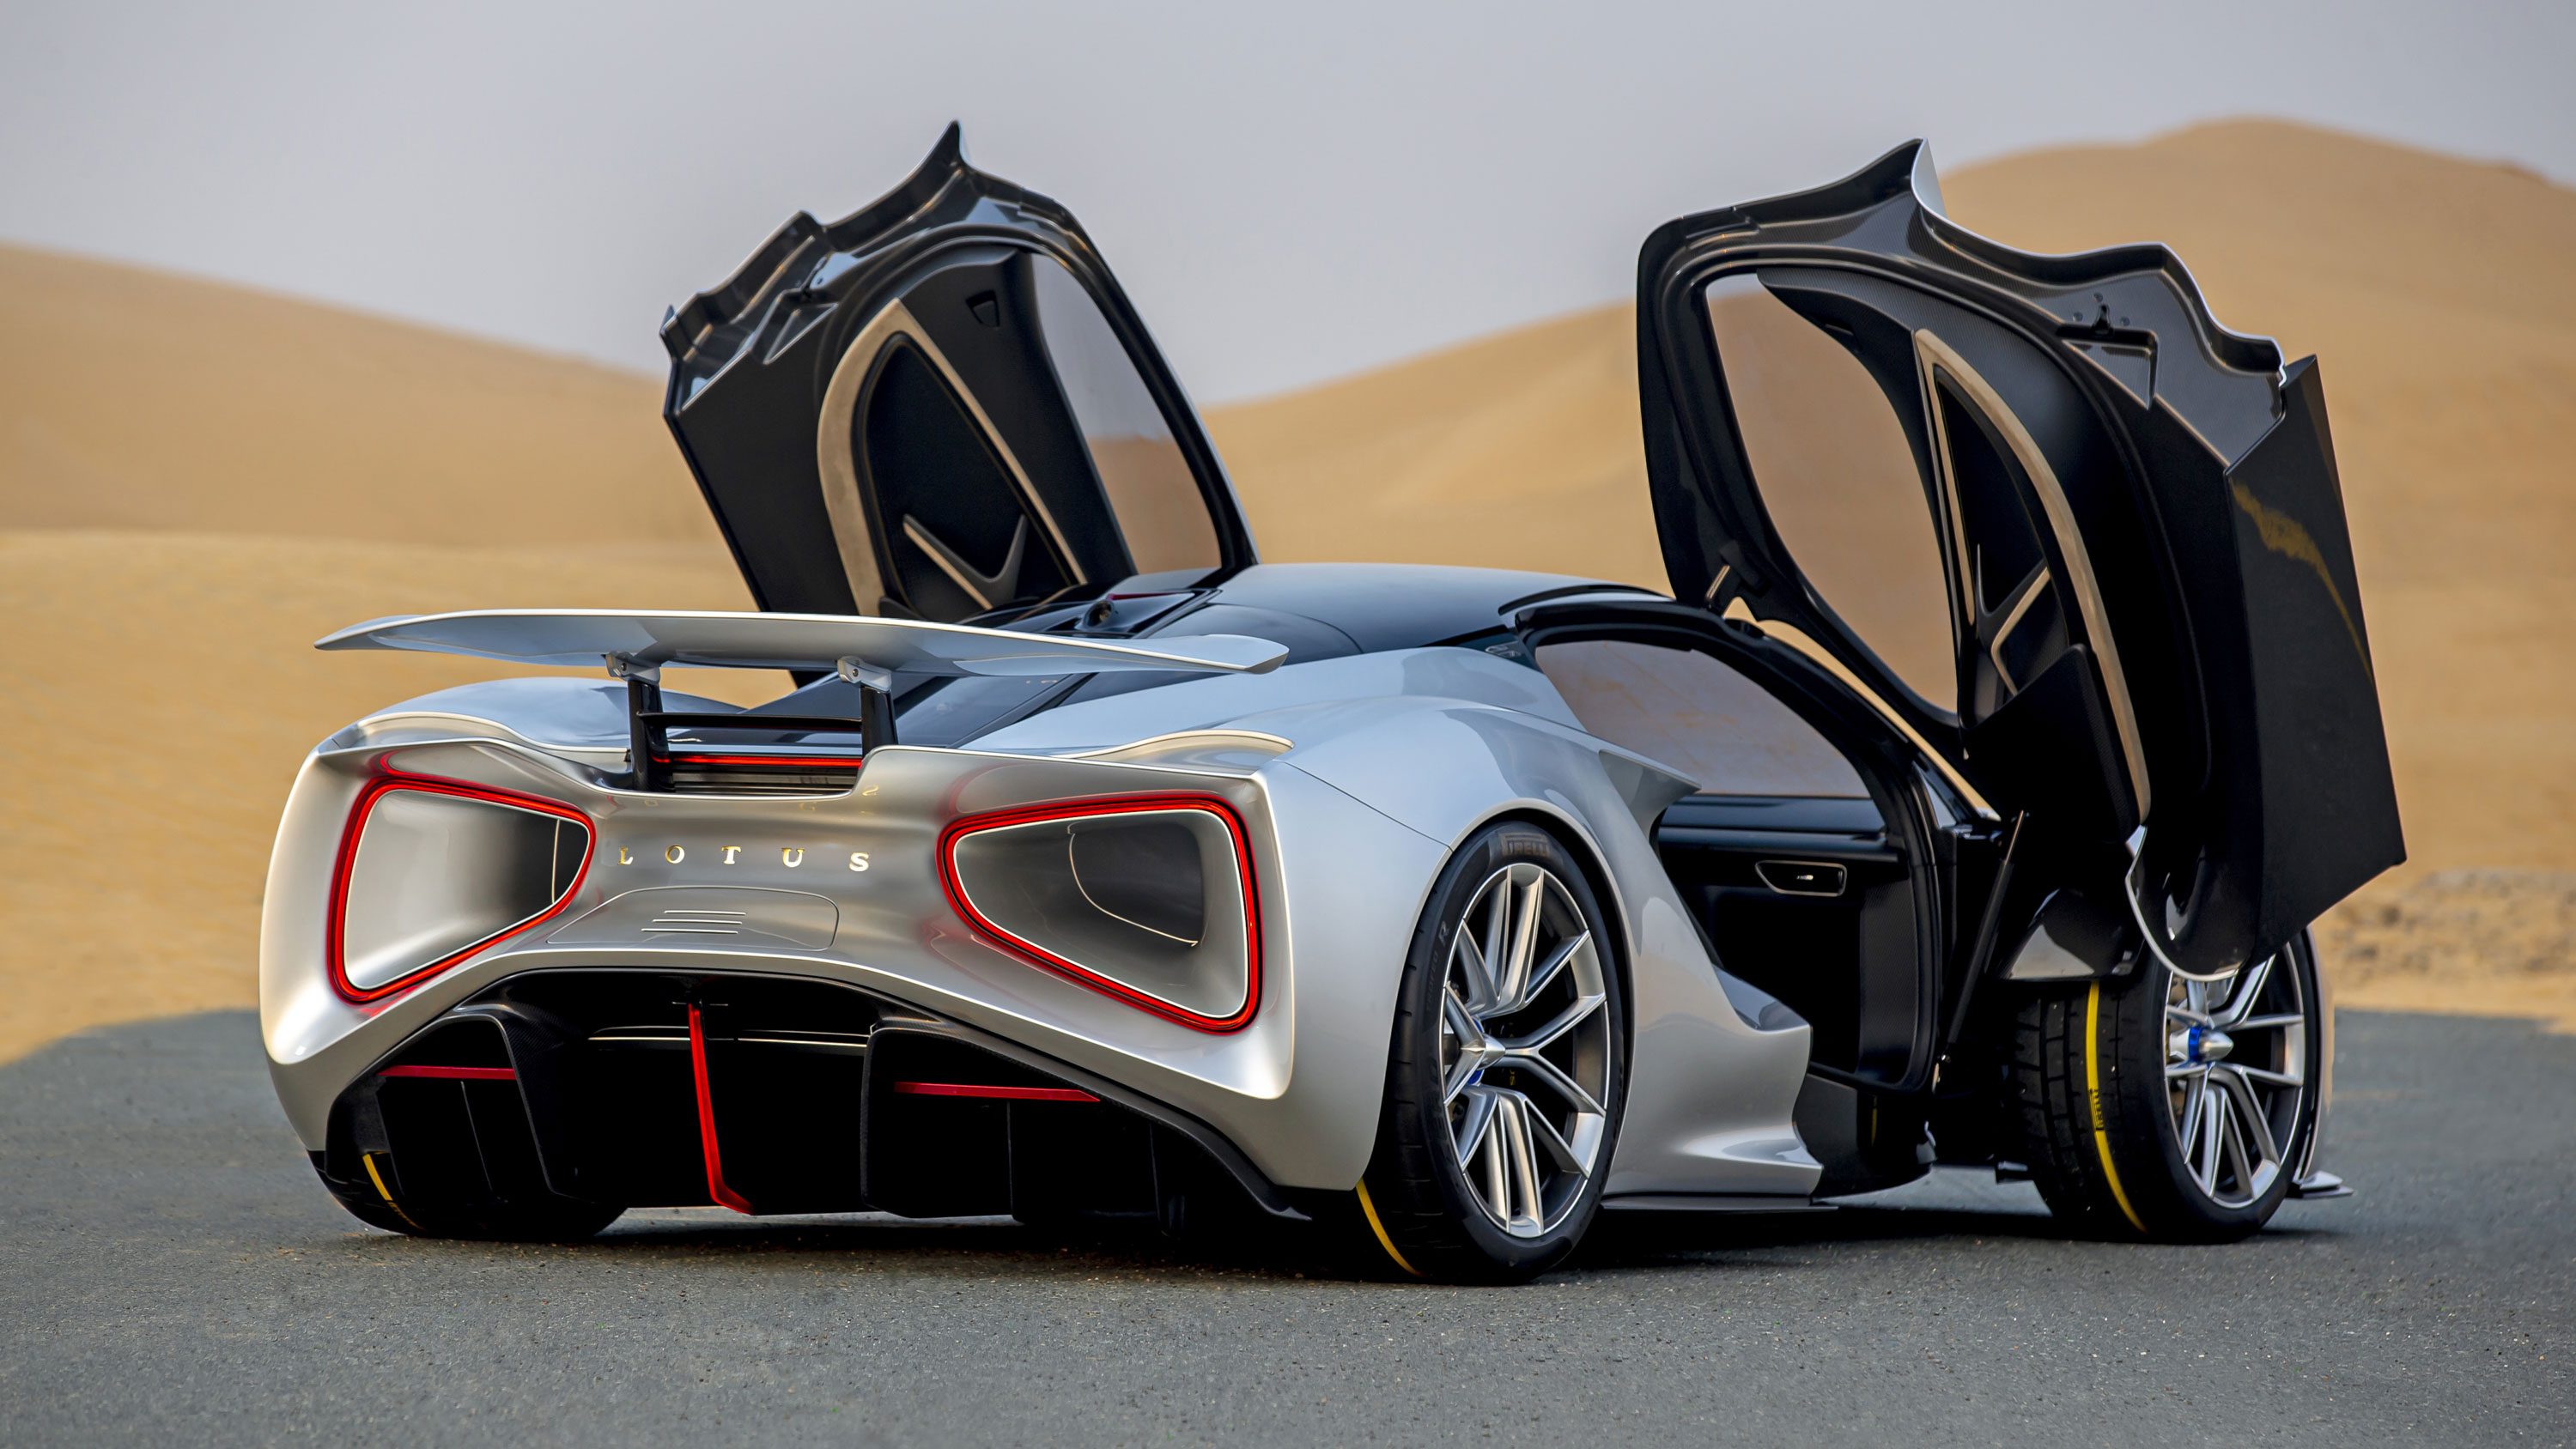 The Lotus Type 135 electric sports car will have its batteries in an